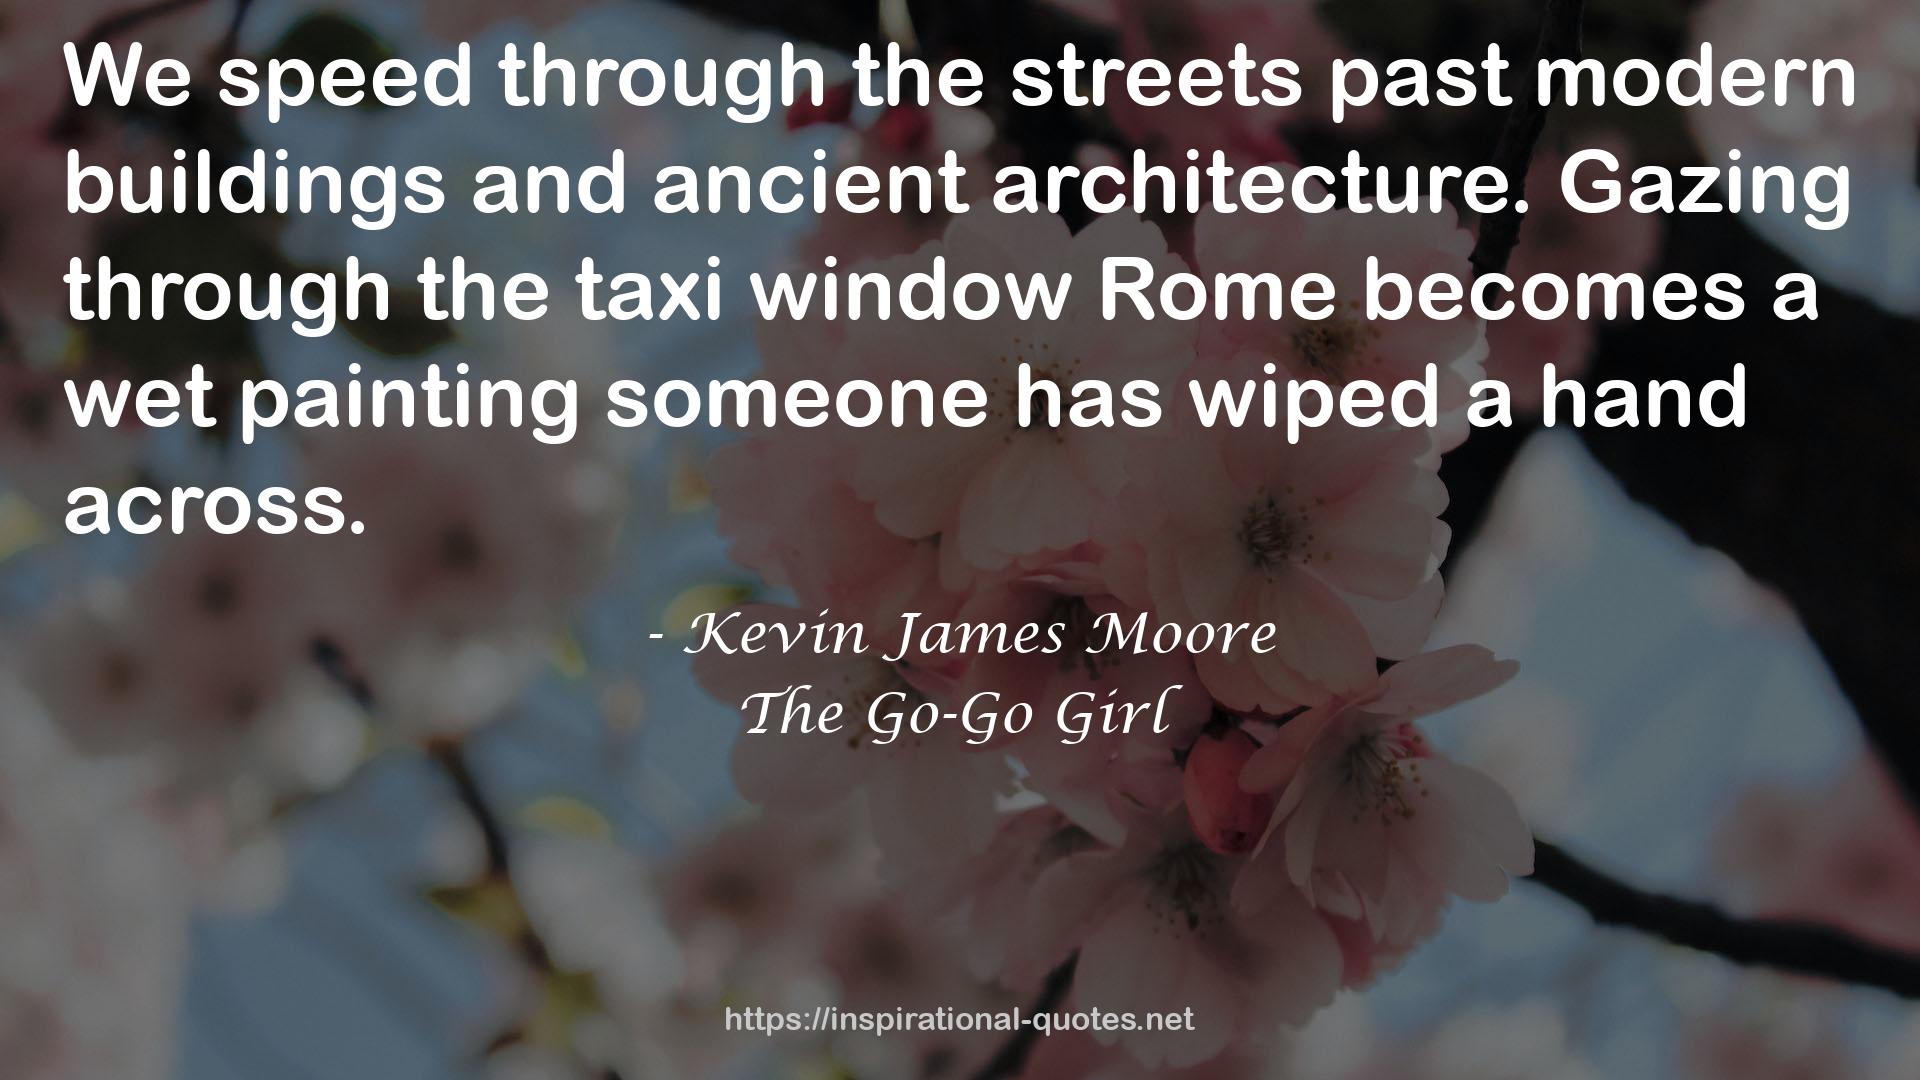 Kevin James Moore QUOTES